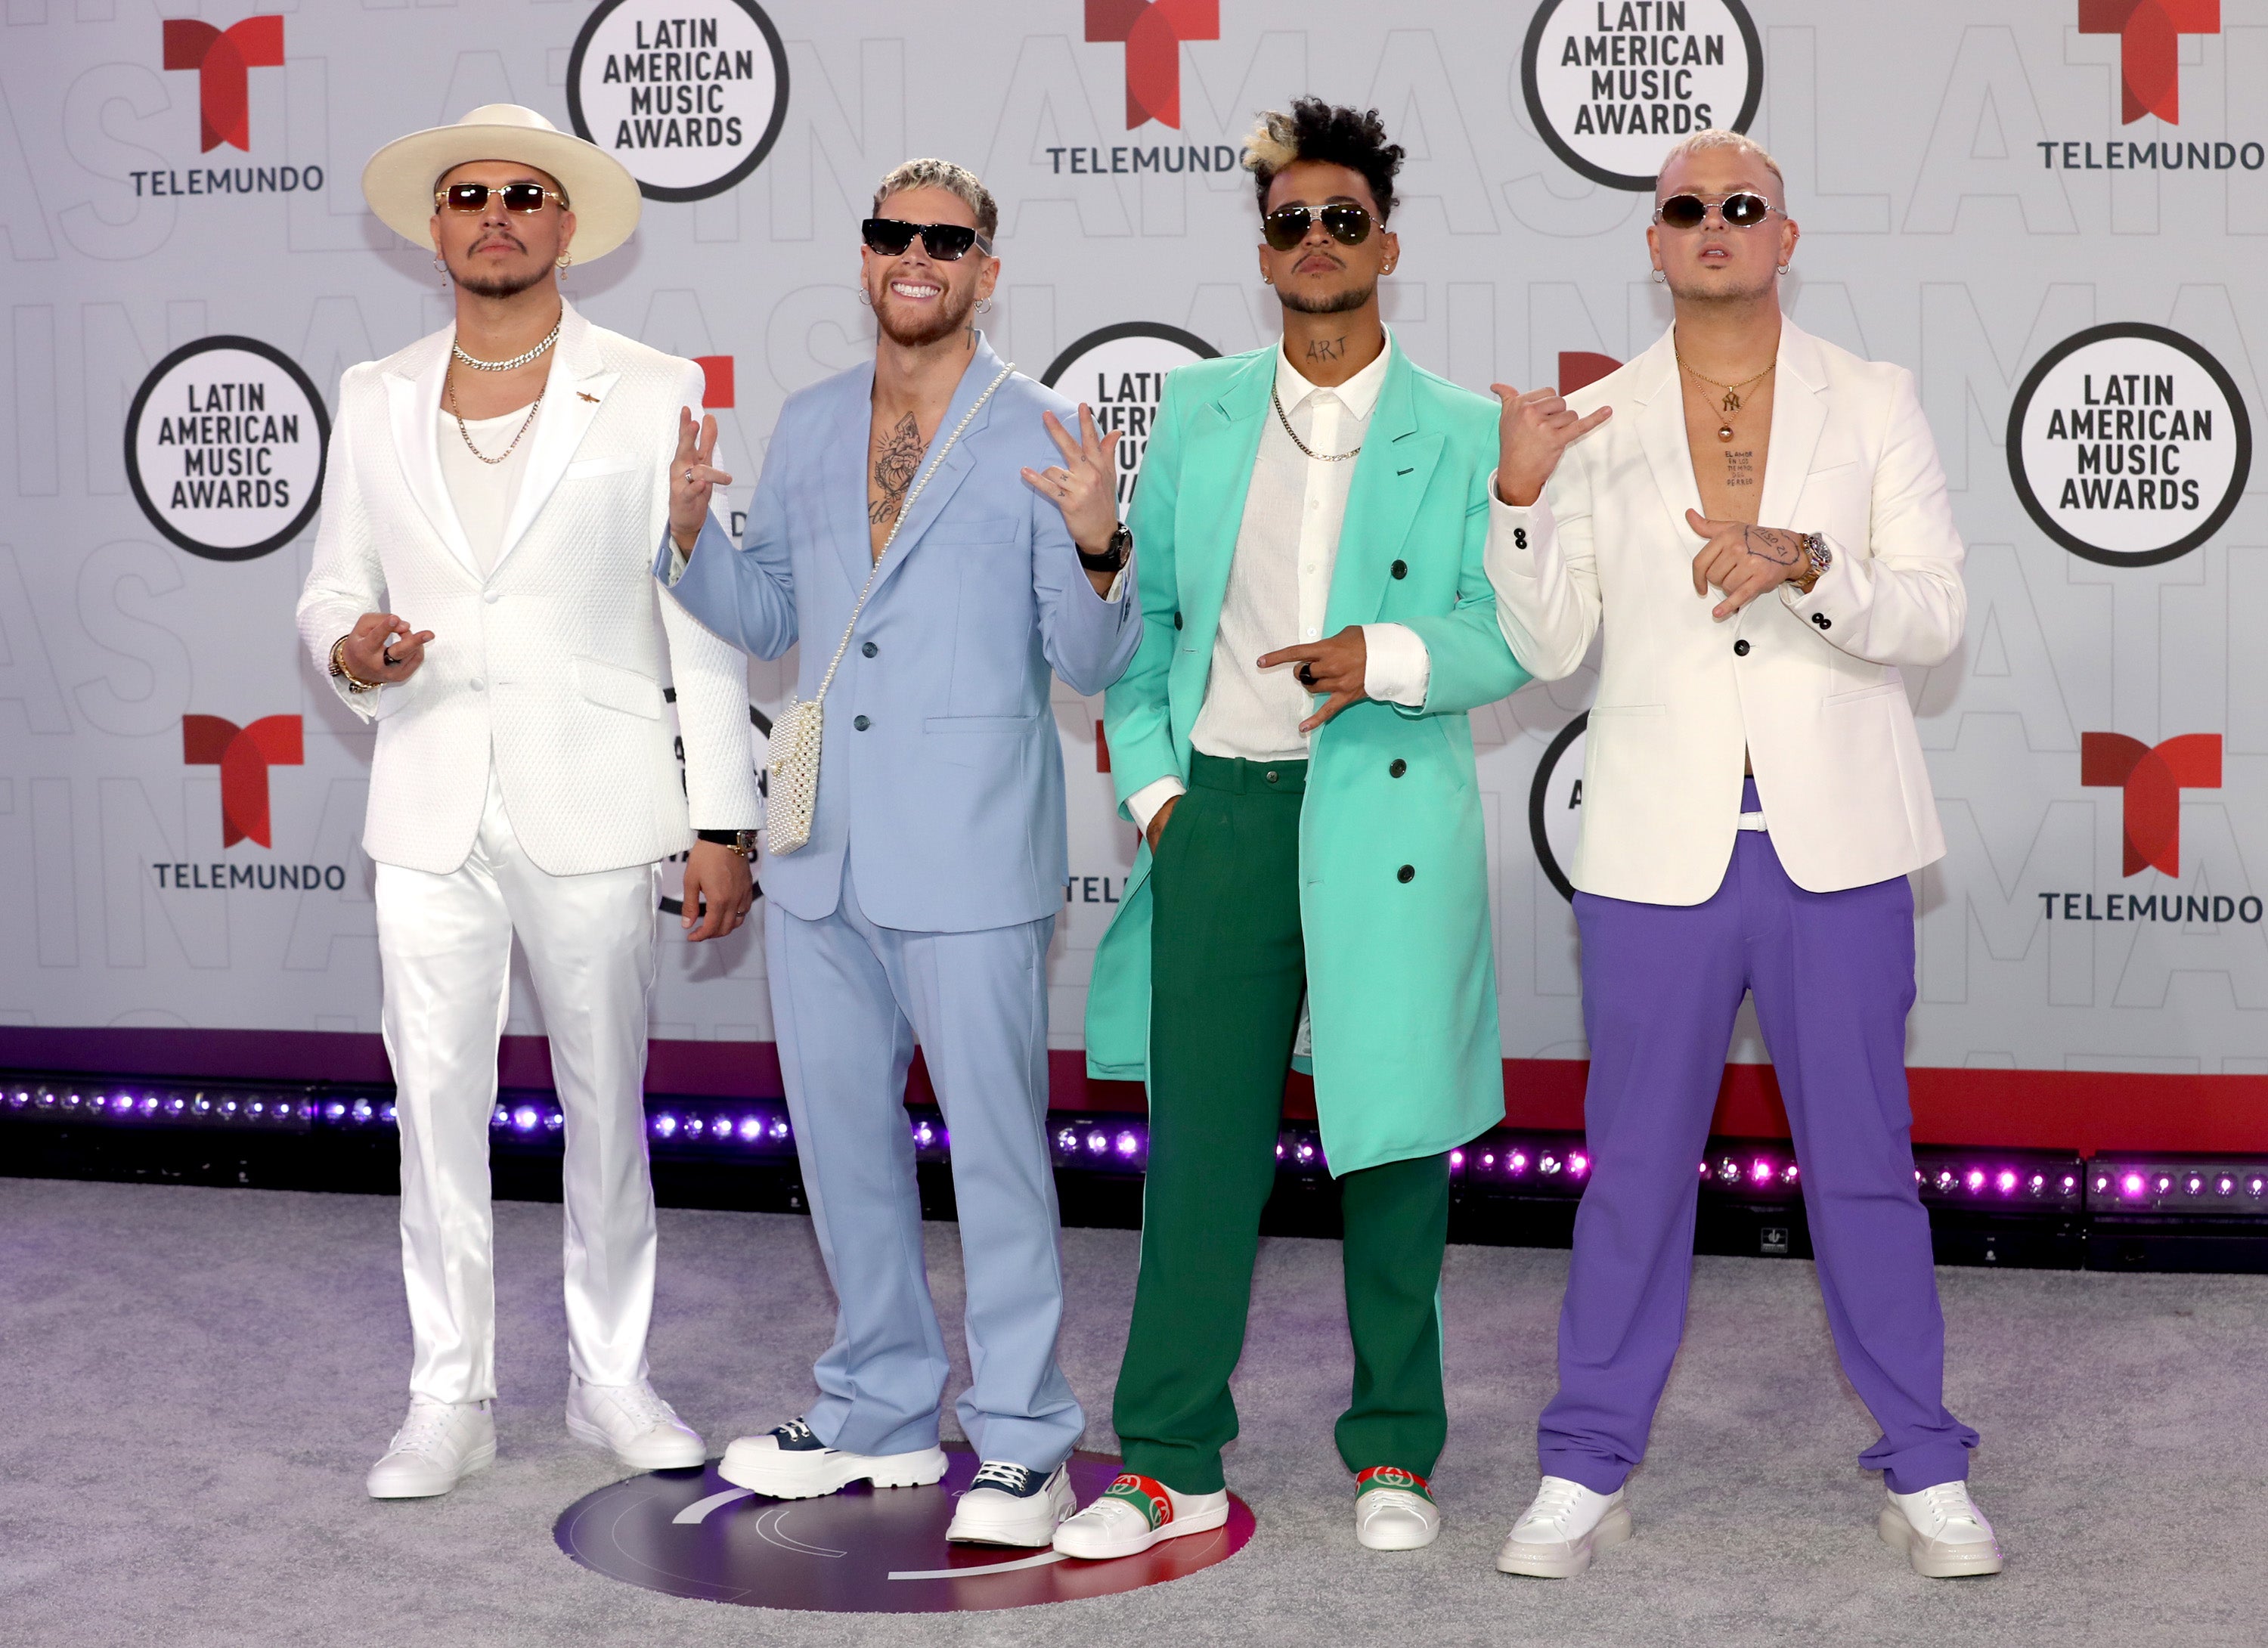 Performers at the Latin American Music Awards 2022